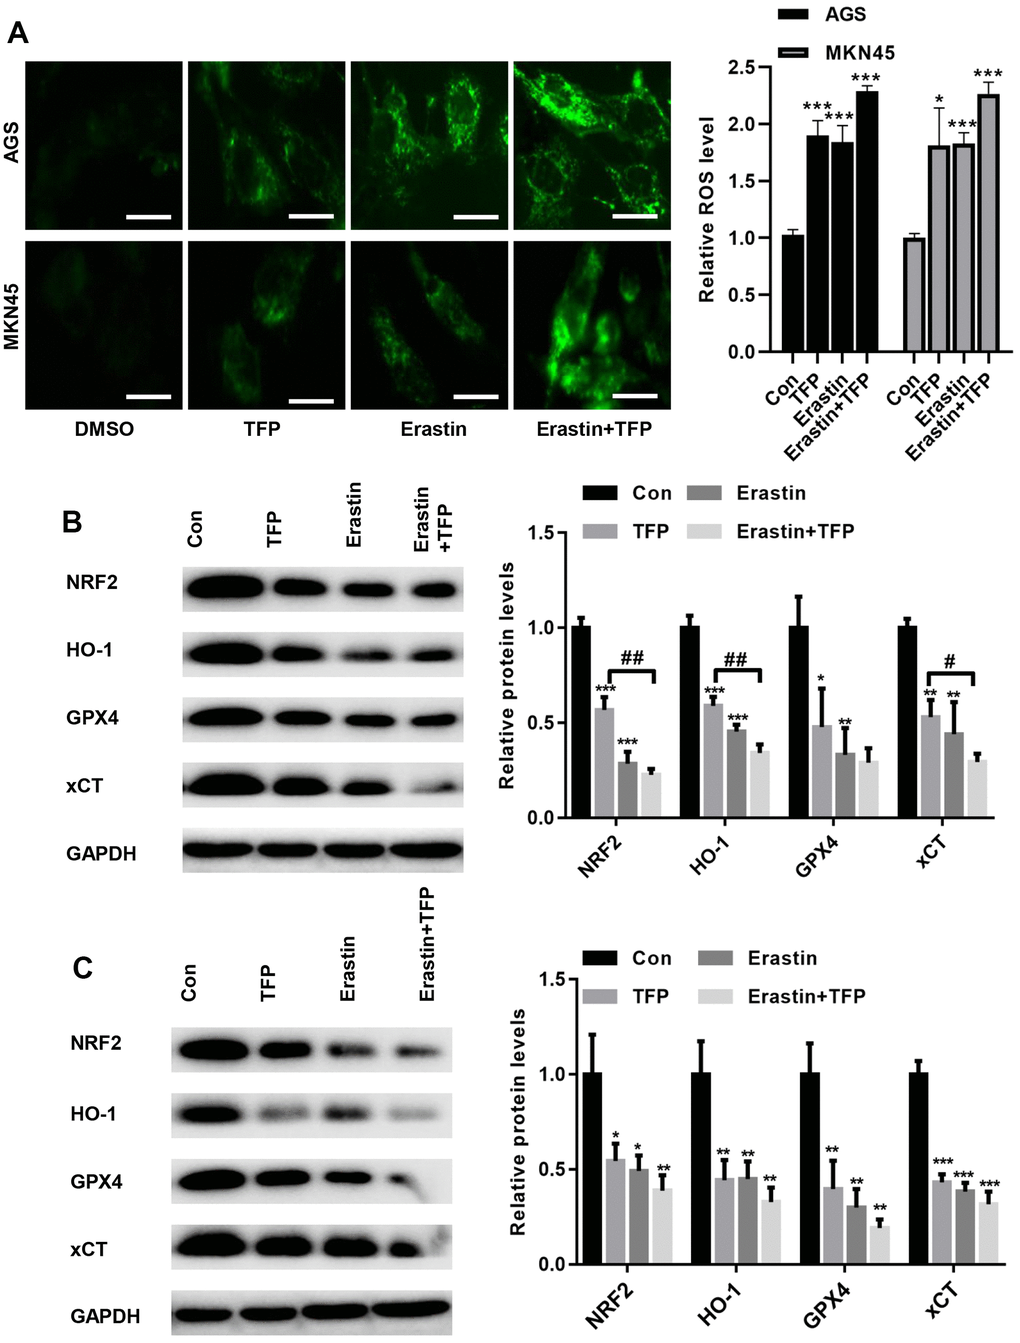 TFP suppressed NRF2/HO-1 activation in both EBV-infected AGS and MKN45 cells. EBV-infected AGS and MKN45 cells were preincubated with 40 μg/mL or 20 μg/mL TFP or 10 μM erastin for 24 h. (A) DCFH-DA staining showed that TFP elevated ROS production in EBV-infected AGS and MKN45 cells (bar=30 μm). Western blot assays showed that TFP significantly suppressed the expression of NRF2, HO-1, GPX4 and xCT in both AGS (B) and MKN45 (C) cells. *p